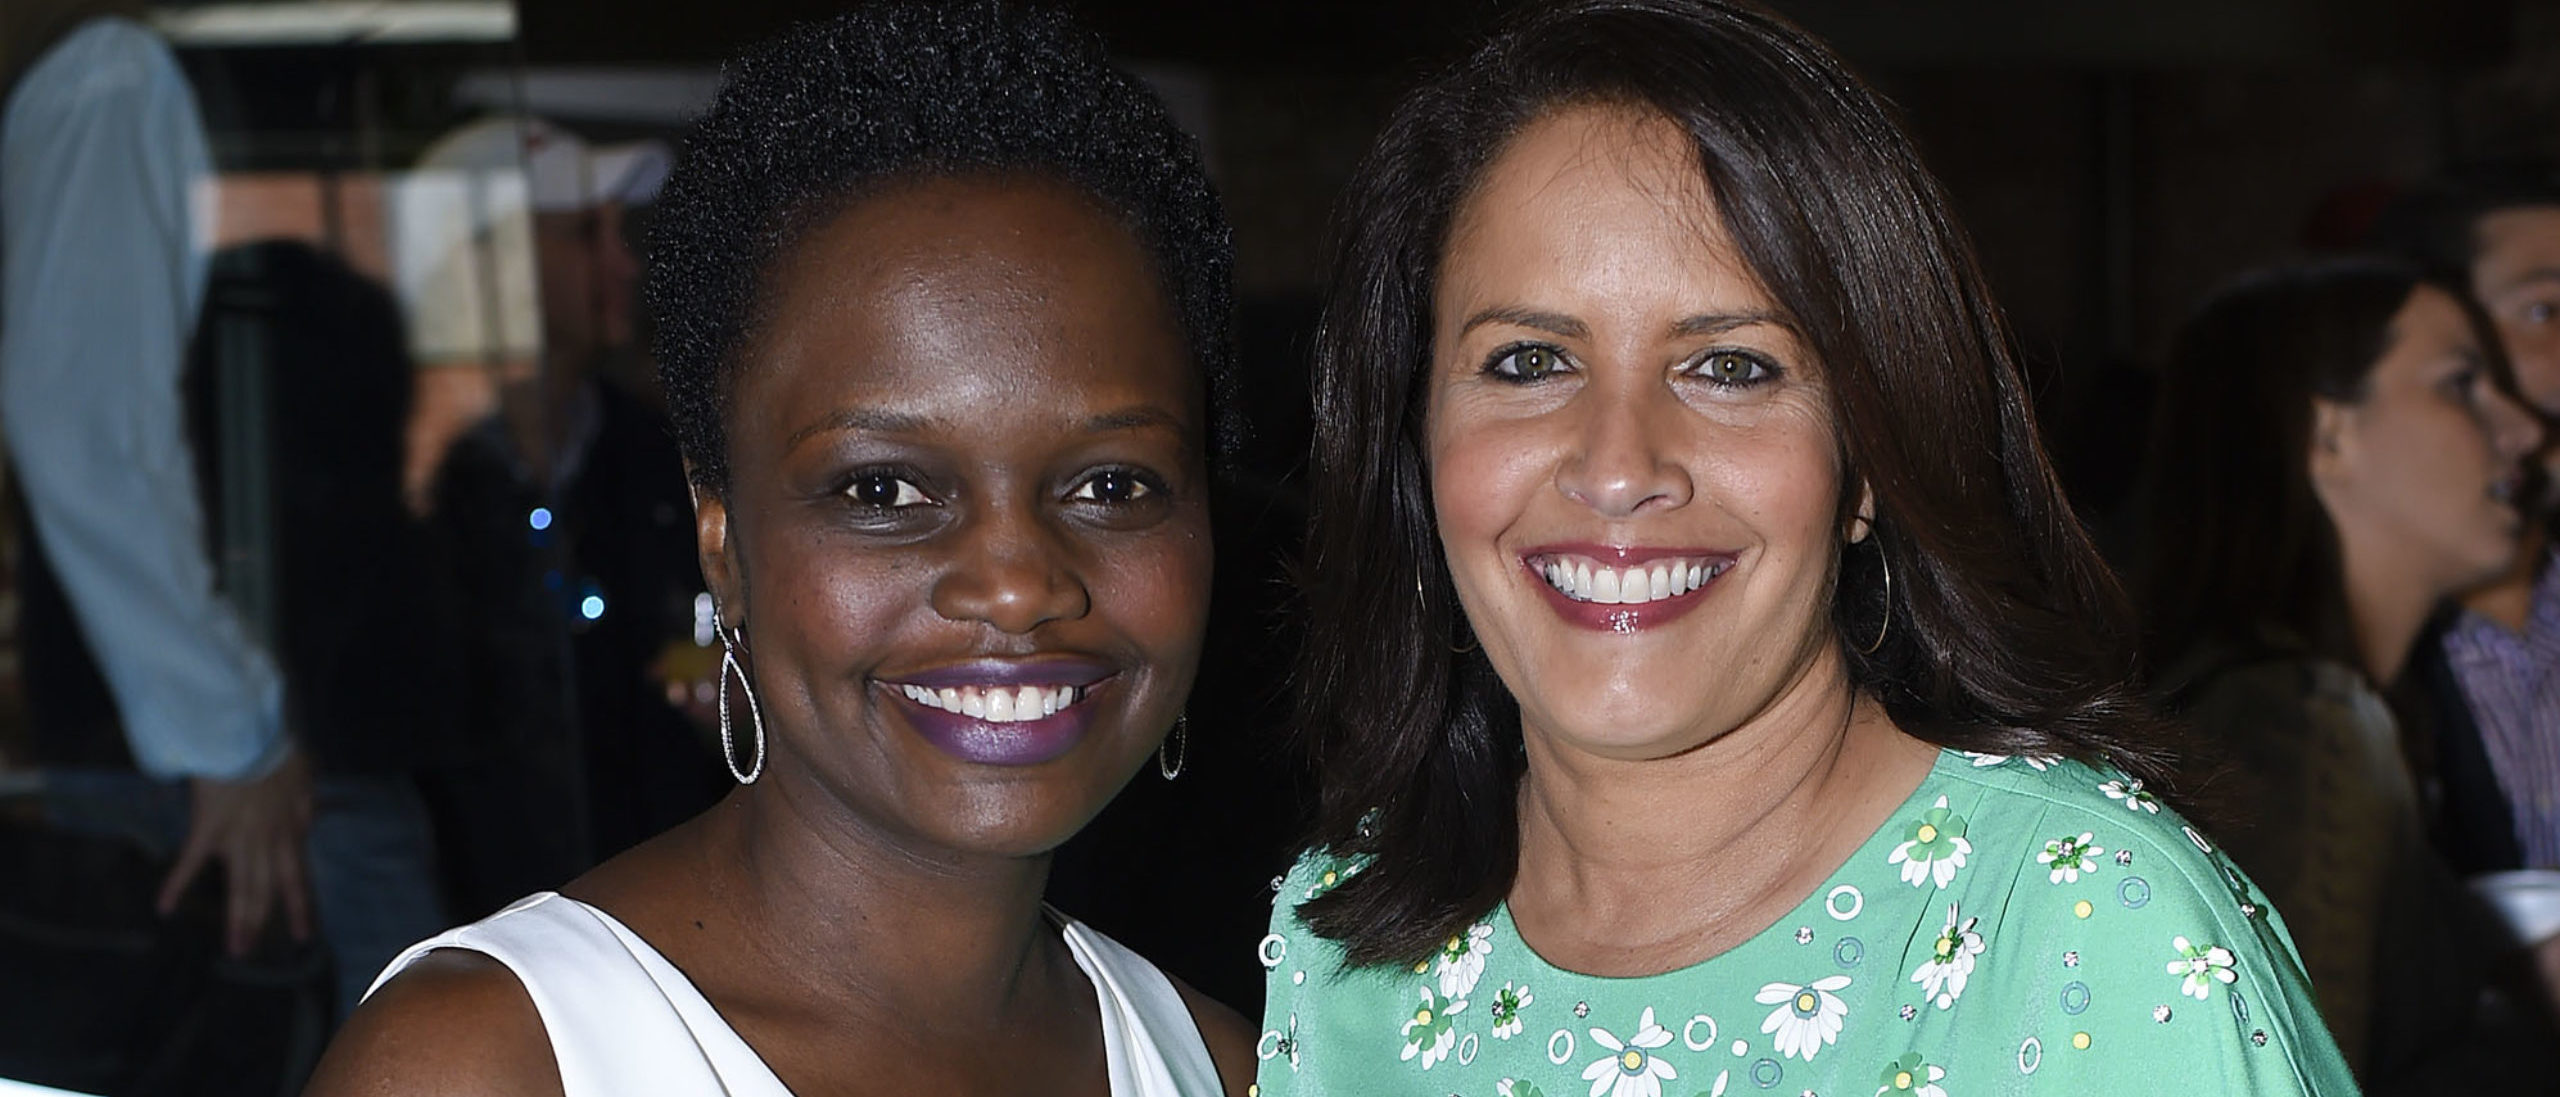 WASHINGTON, DC - APRIL 26: Karine Jean Pierre and Suzanne Malveaux attend the CNN Correspondents' Brunch at Toolbox Studio on April 26, 2015 in Washington, DC. (Photo by Riccardo S. Savi/Getty Images)